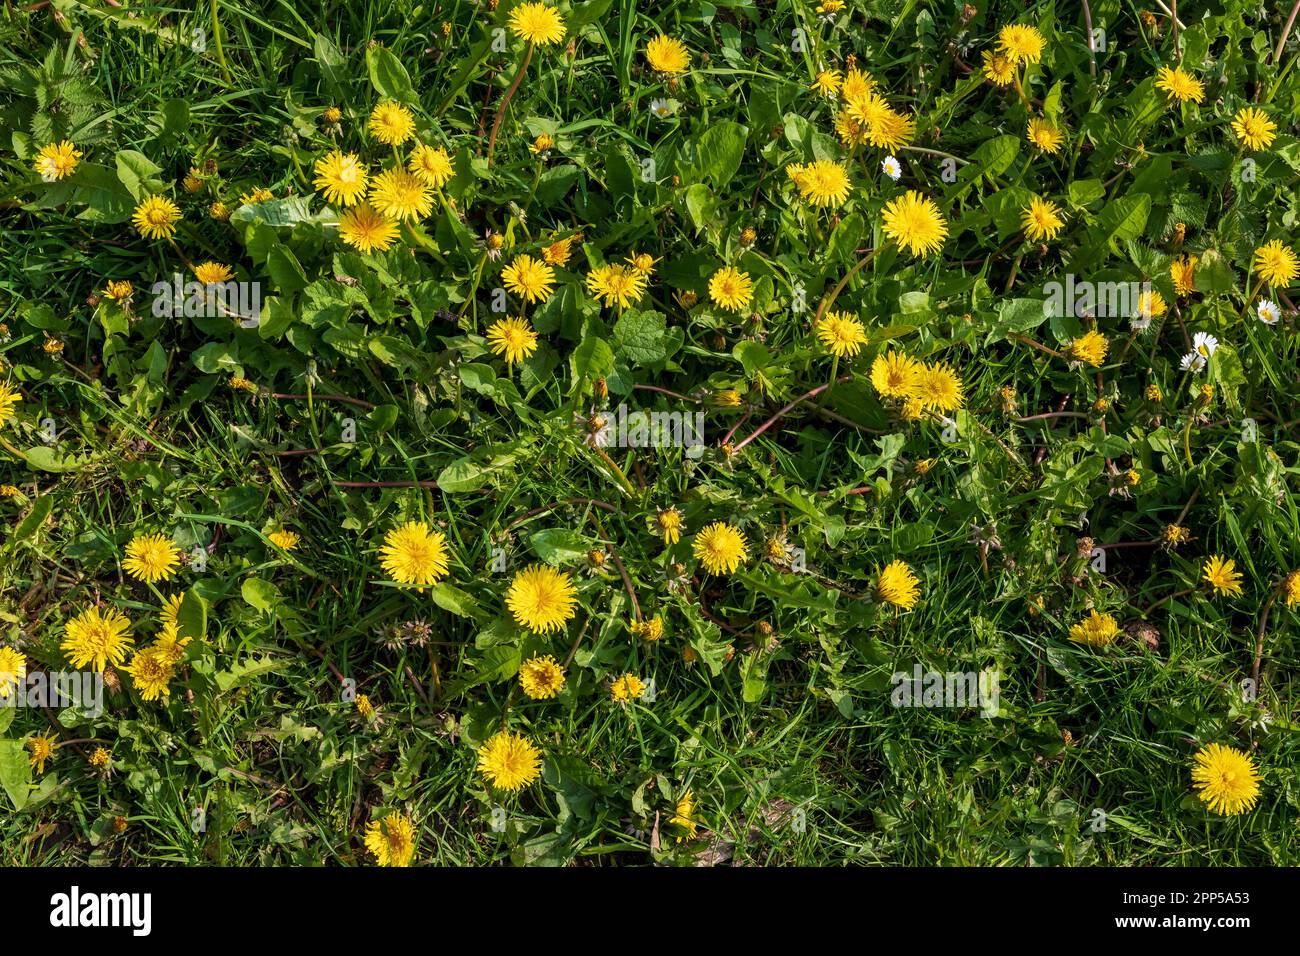 patch of dandelion weeds wit their yellow flower heads. Stock Photo